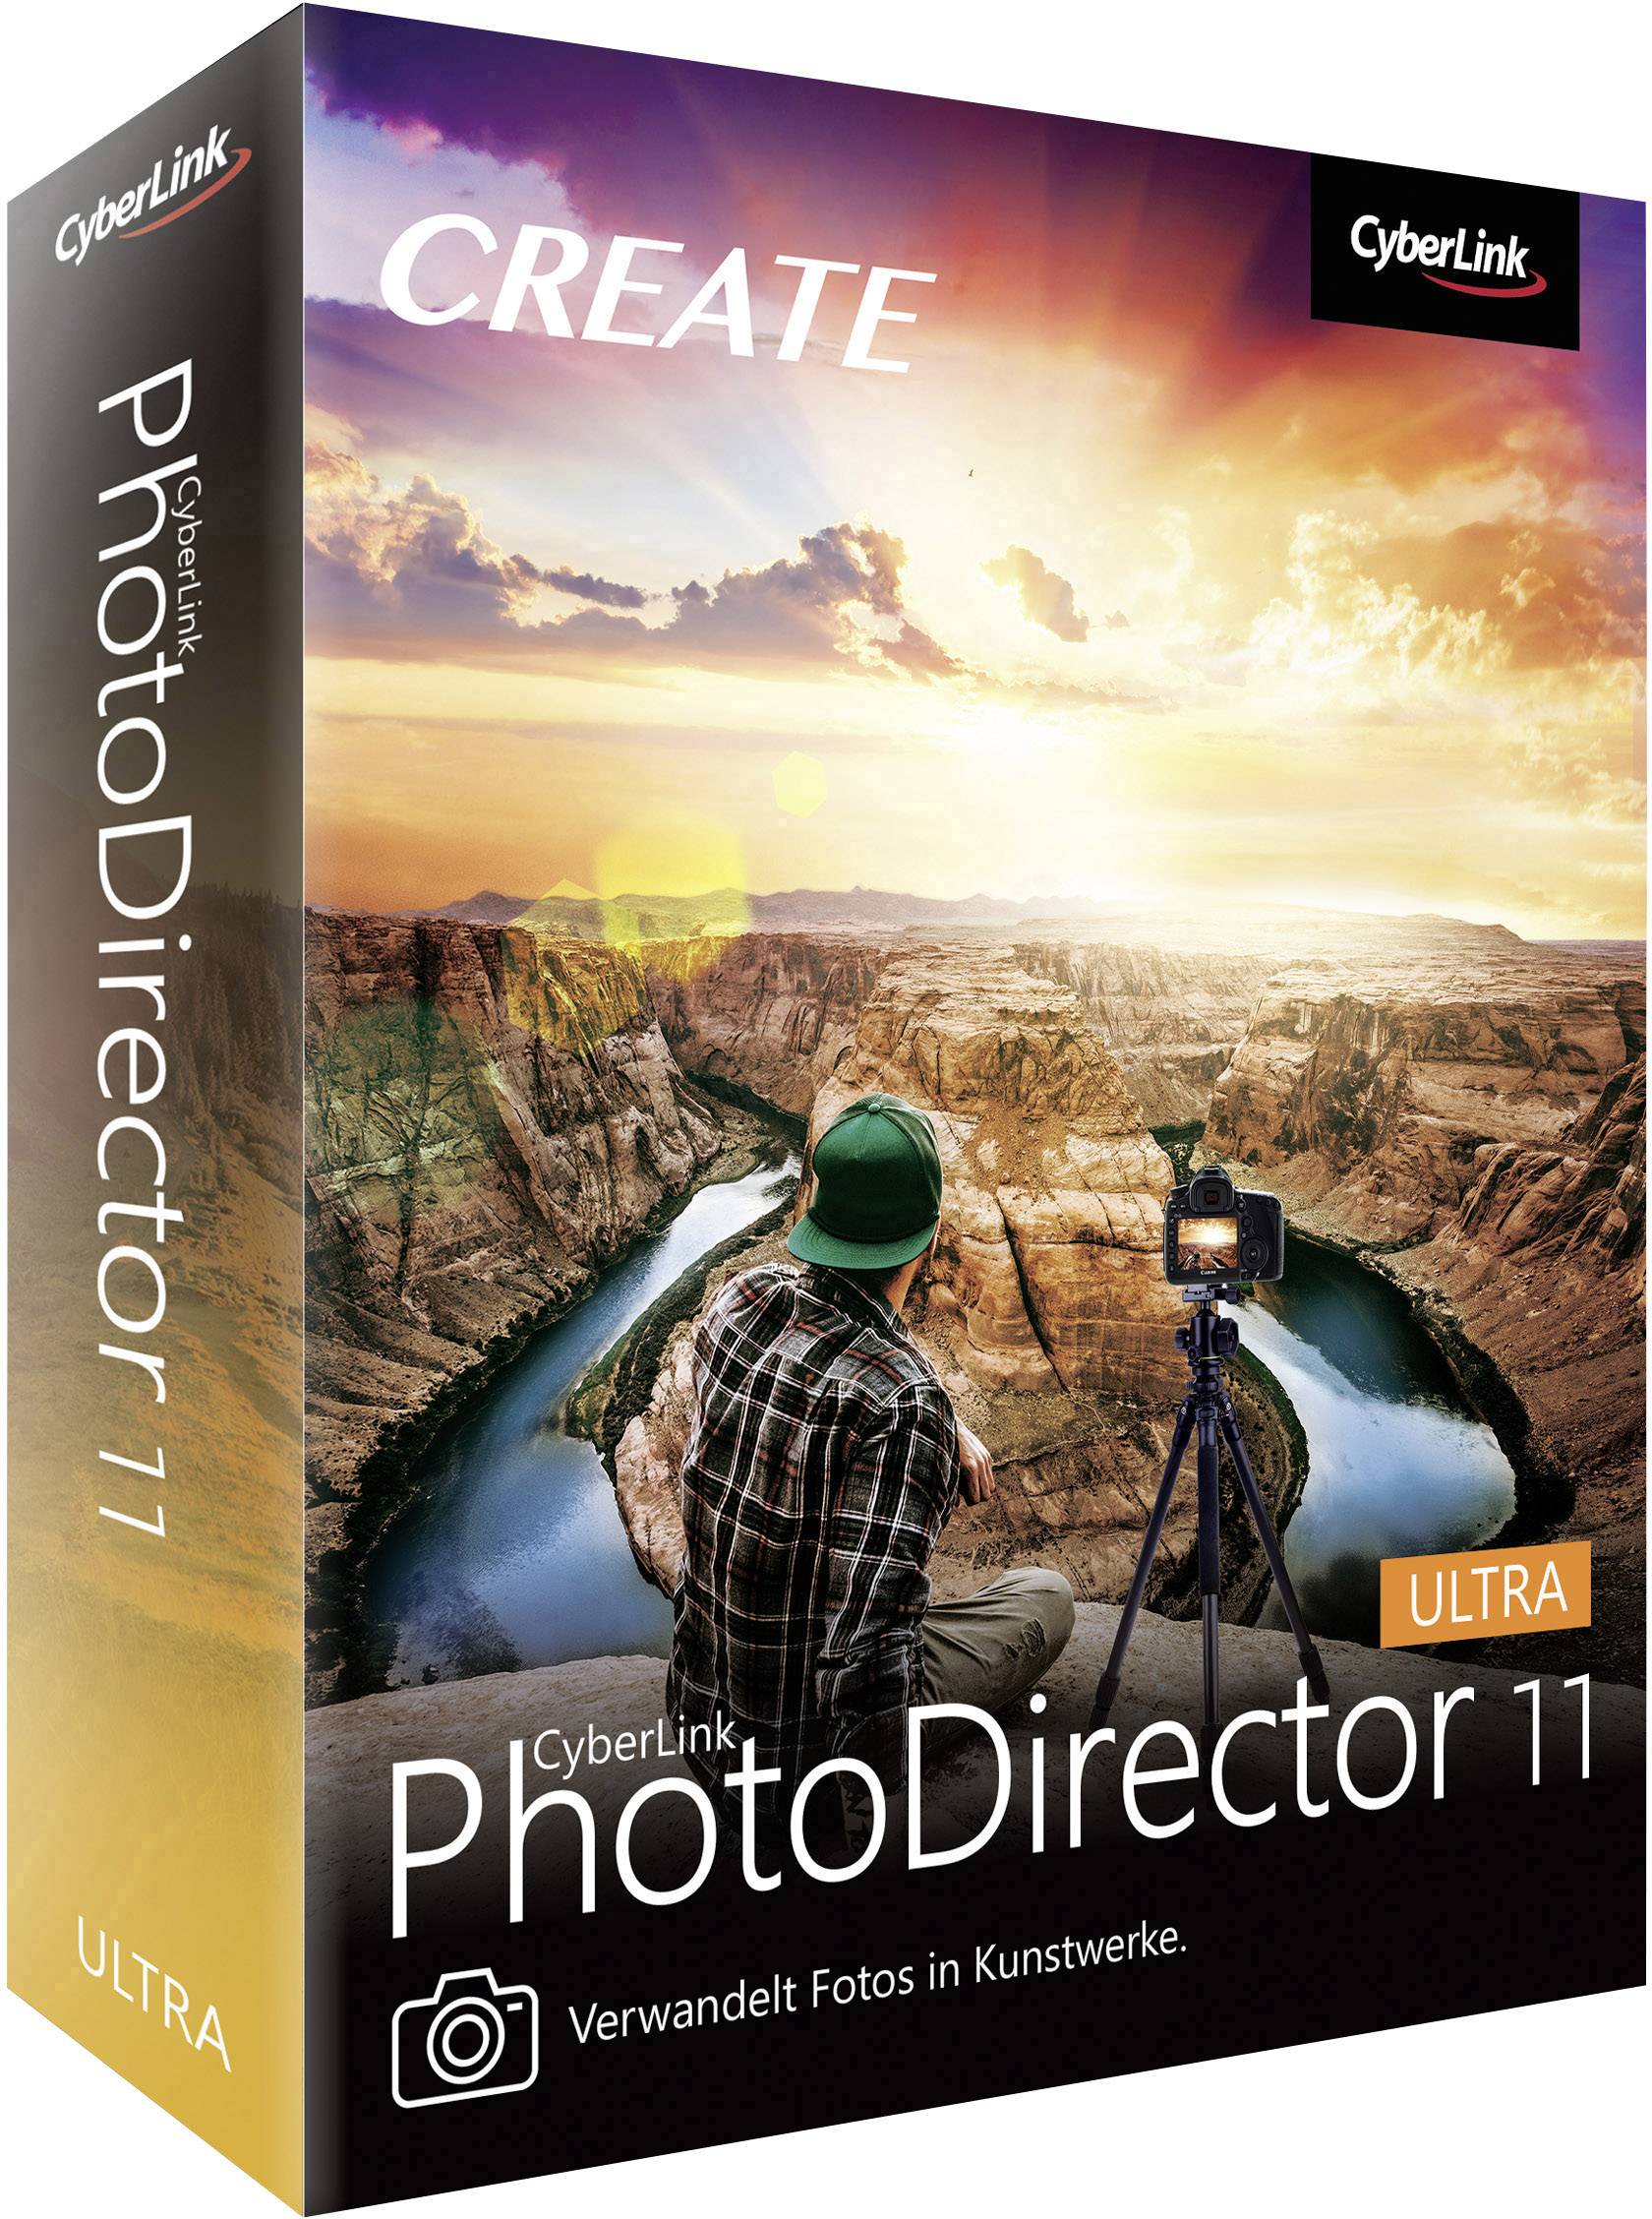 download the last version for windows CyberLink PhotoDirector Ultra 15.0.0907.0